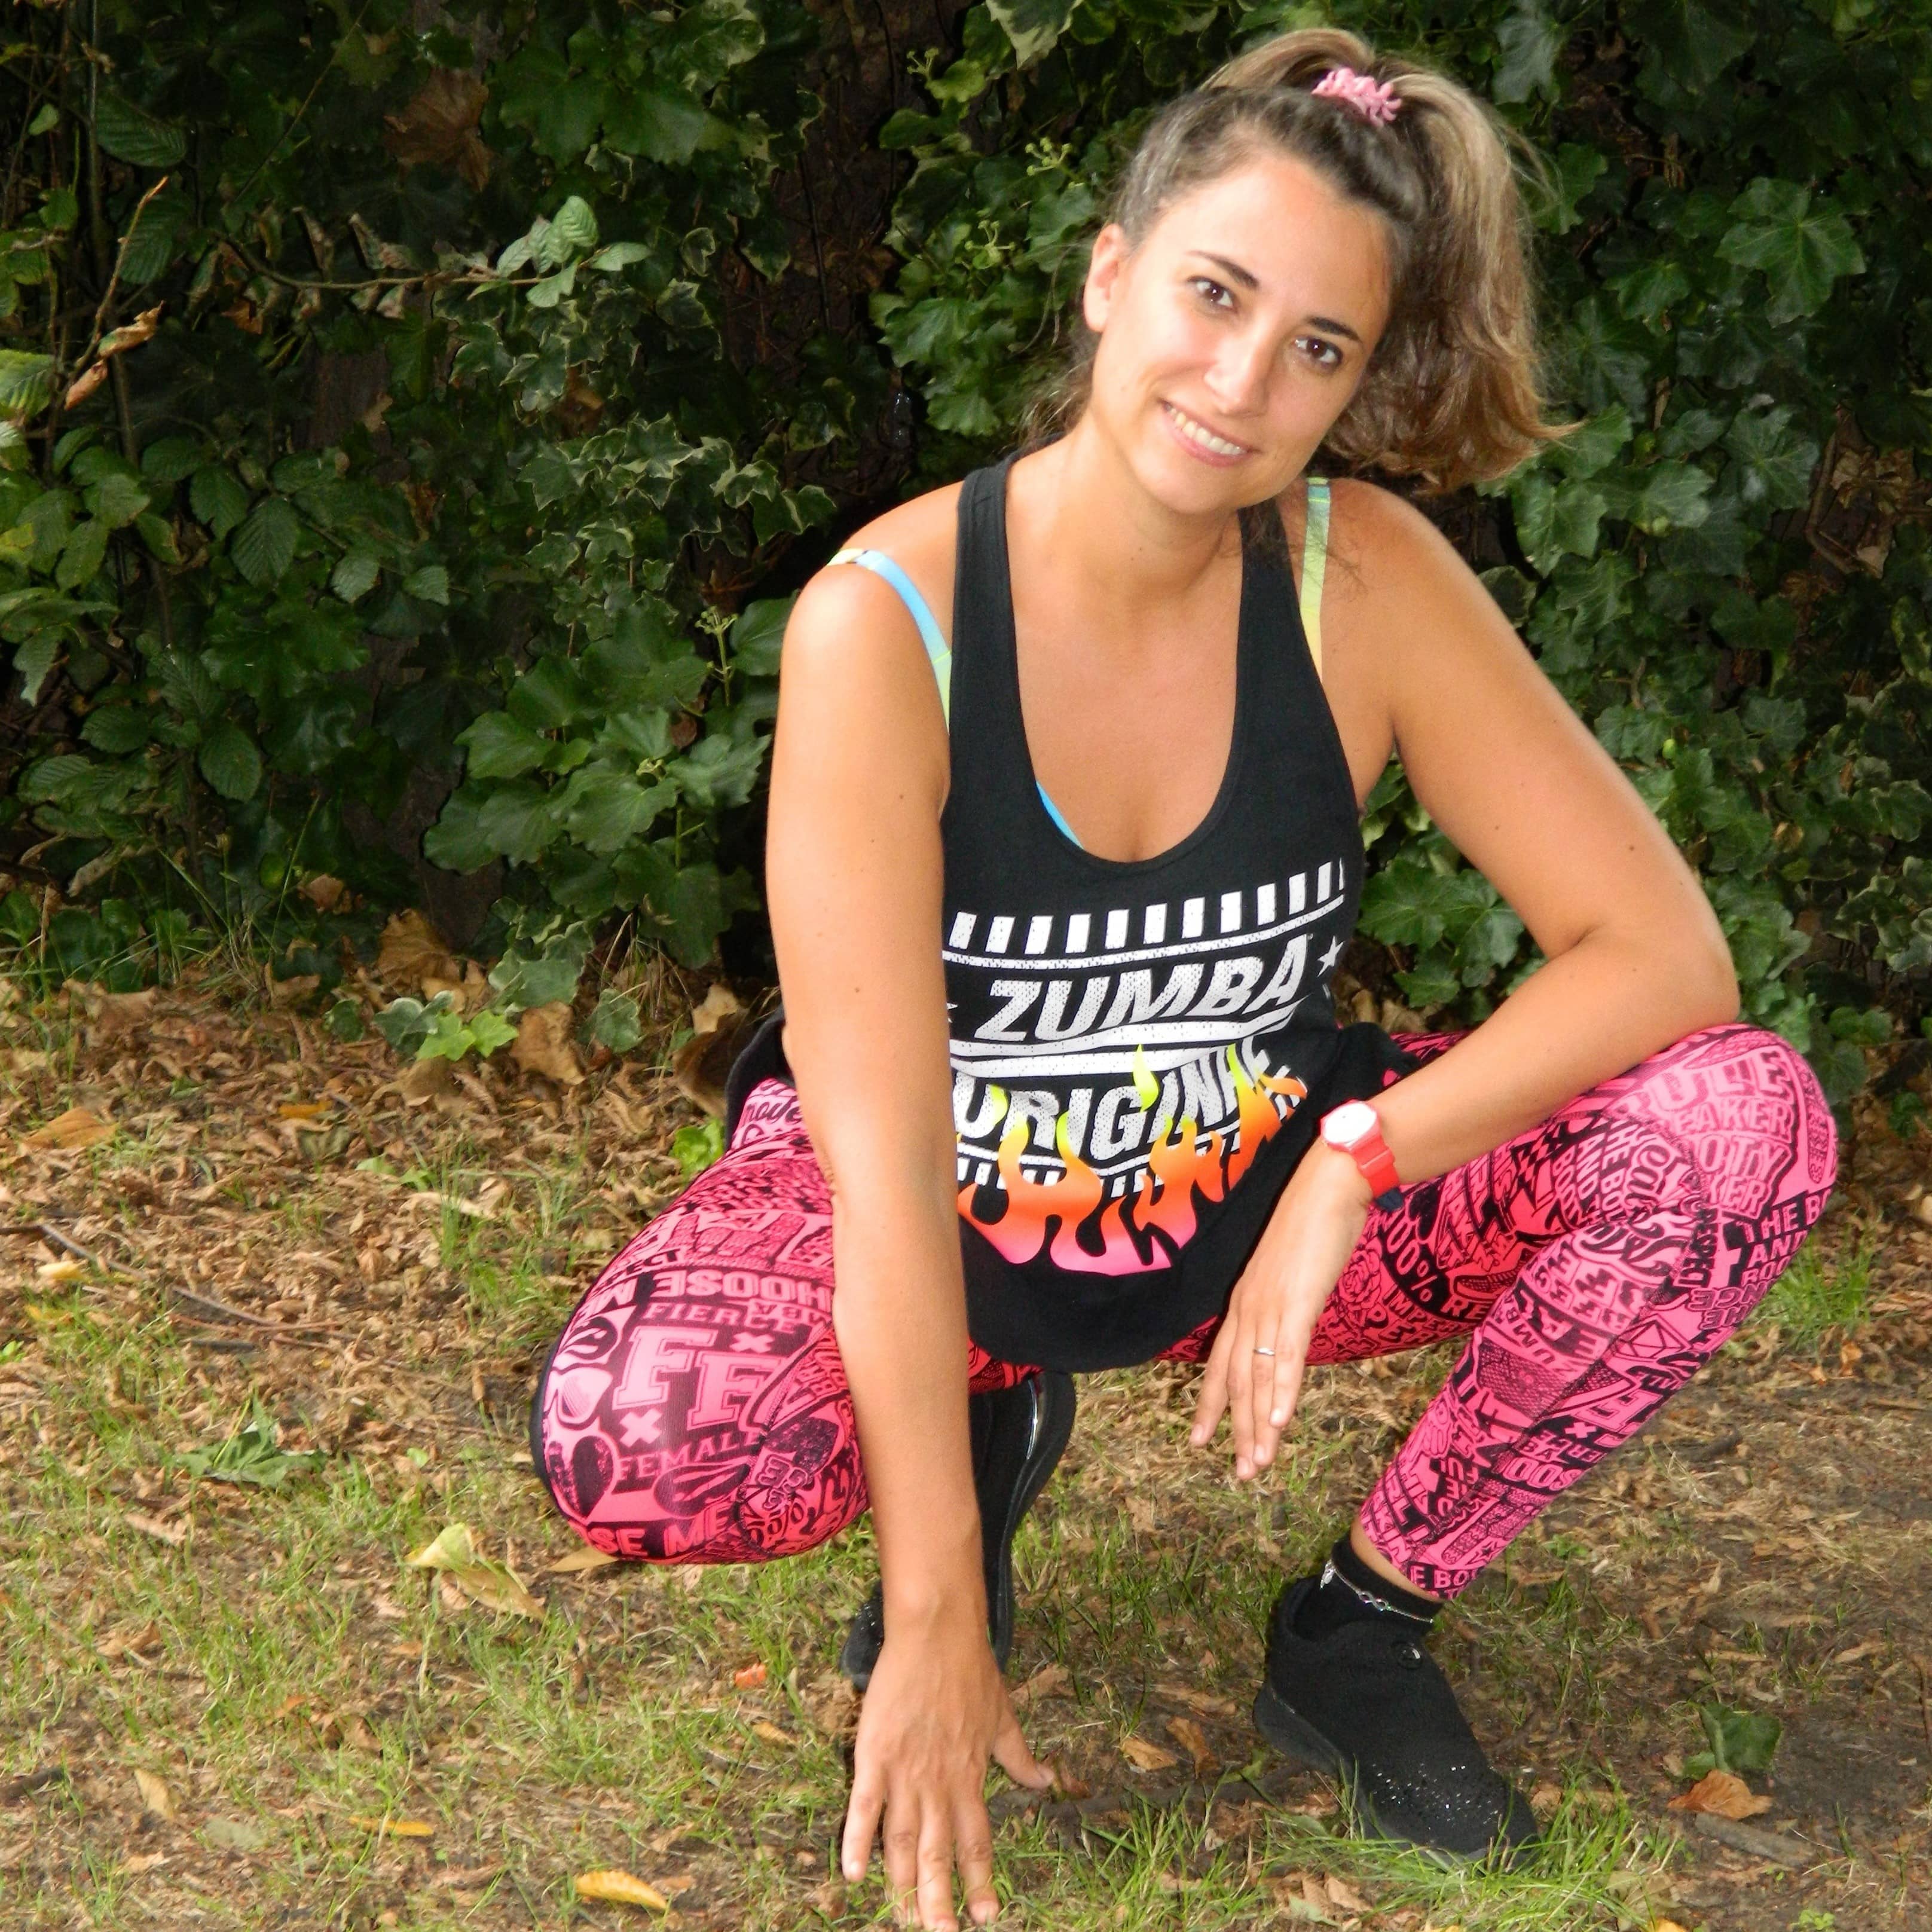 BCD M&E employee Viola Corsini in workout gear | Global Agency BCD Meetings & Events